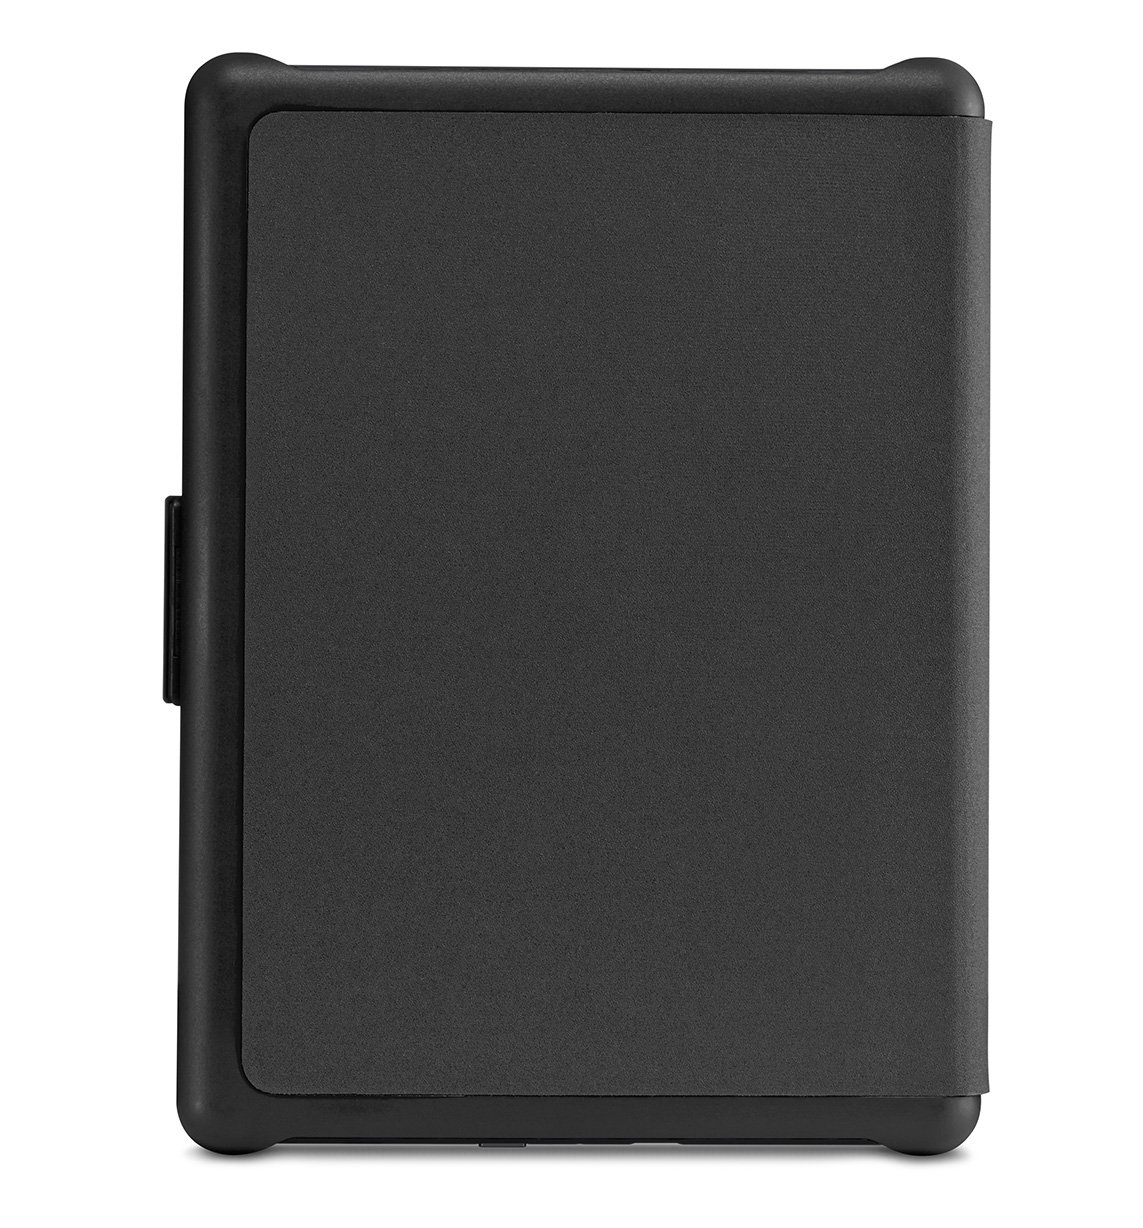 Amazon Cover for Kindle (8th Generation, 2016 - will not fit Paperwhite, Oasis or any other generation of Kindles) - Black